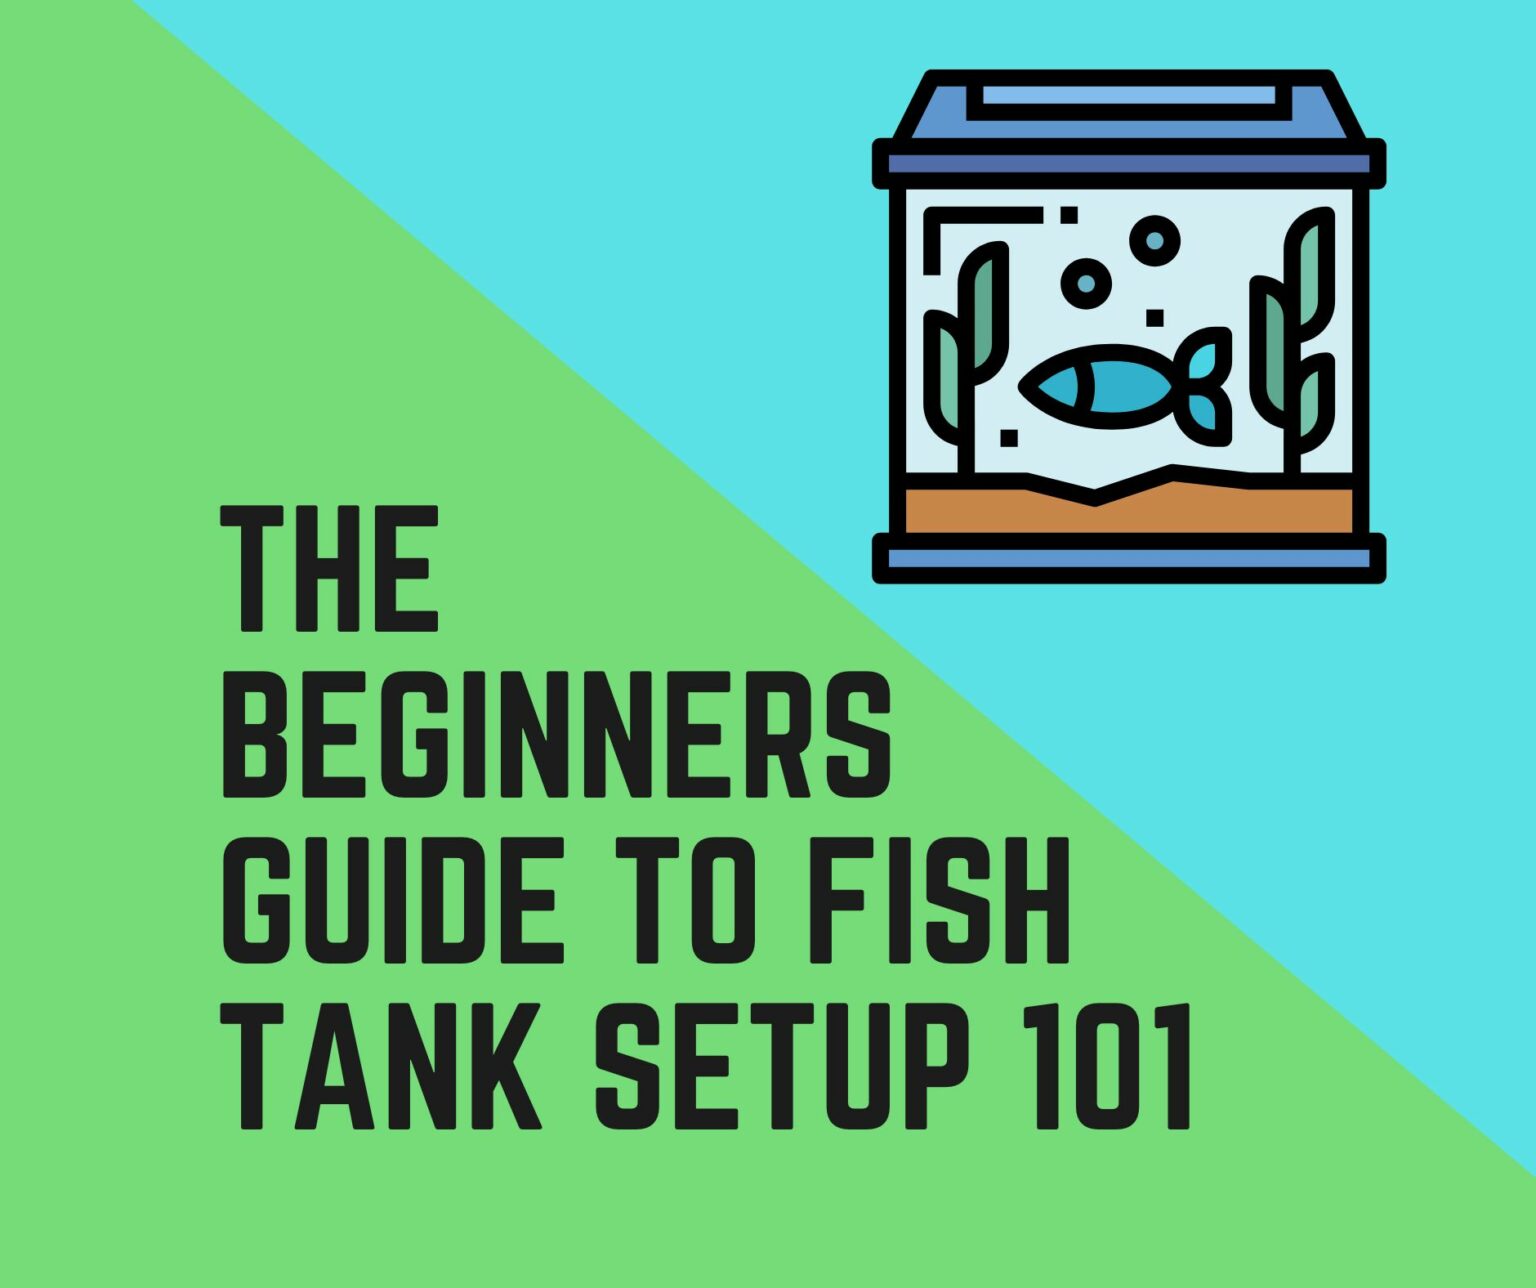 the-beginners-guide-to-fish-tank-setup-101-guppy-fish-care